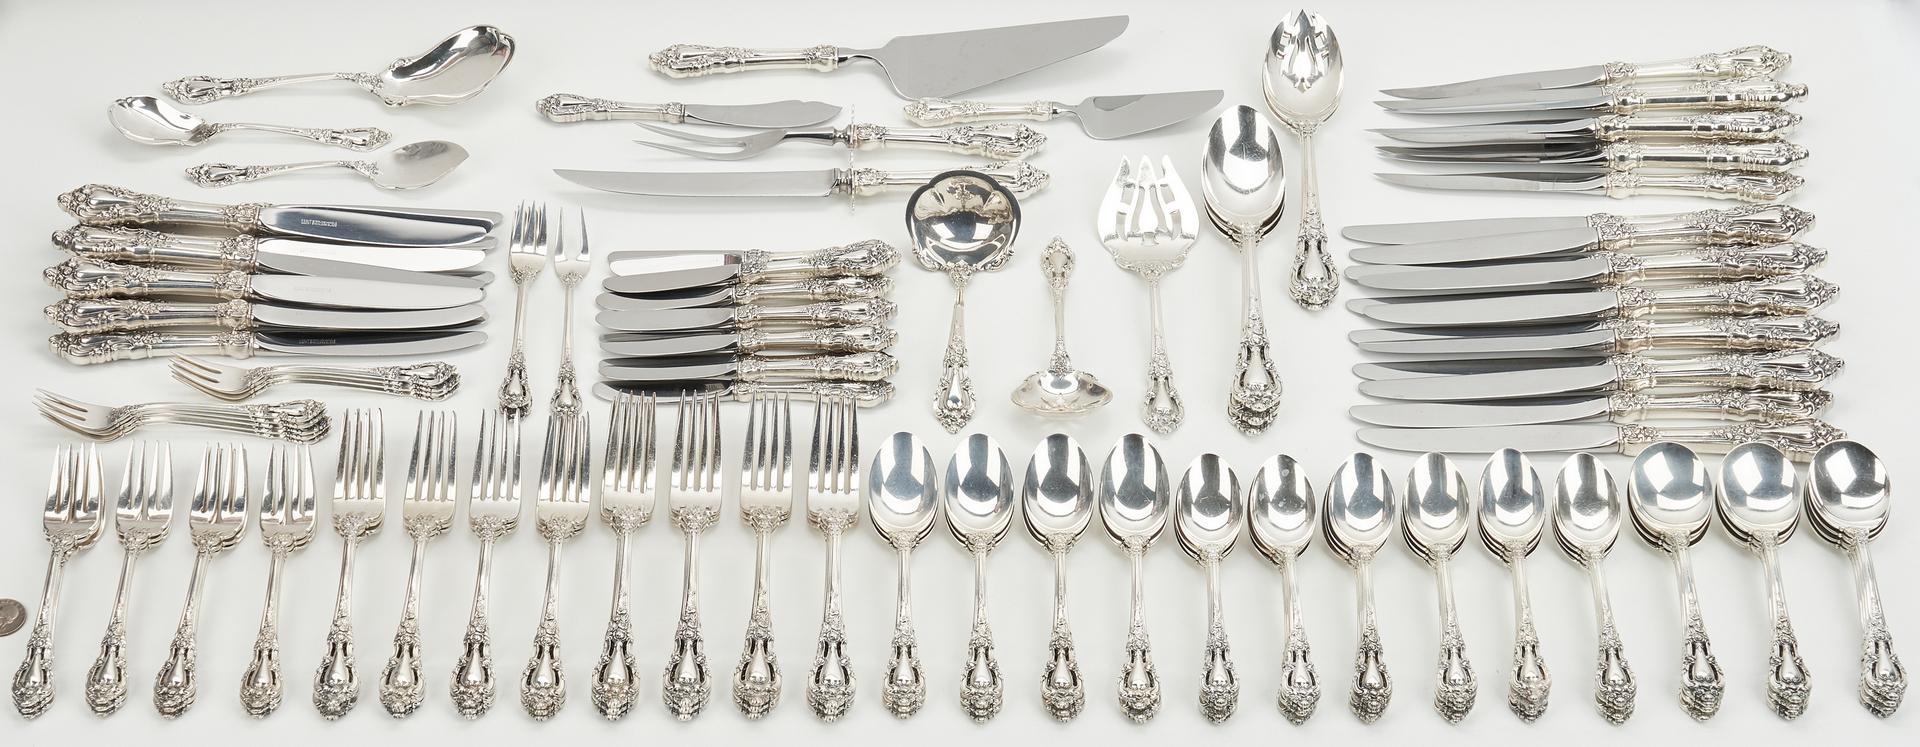 157 Pcs. Lunt Eloquence Pattern Sterling Silver Flatware - Image 2 of 17